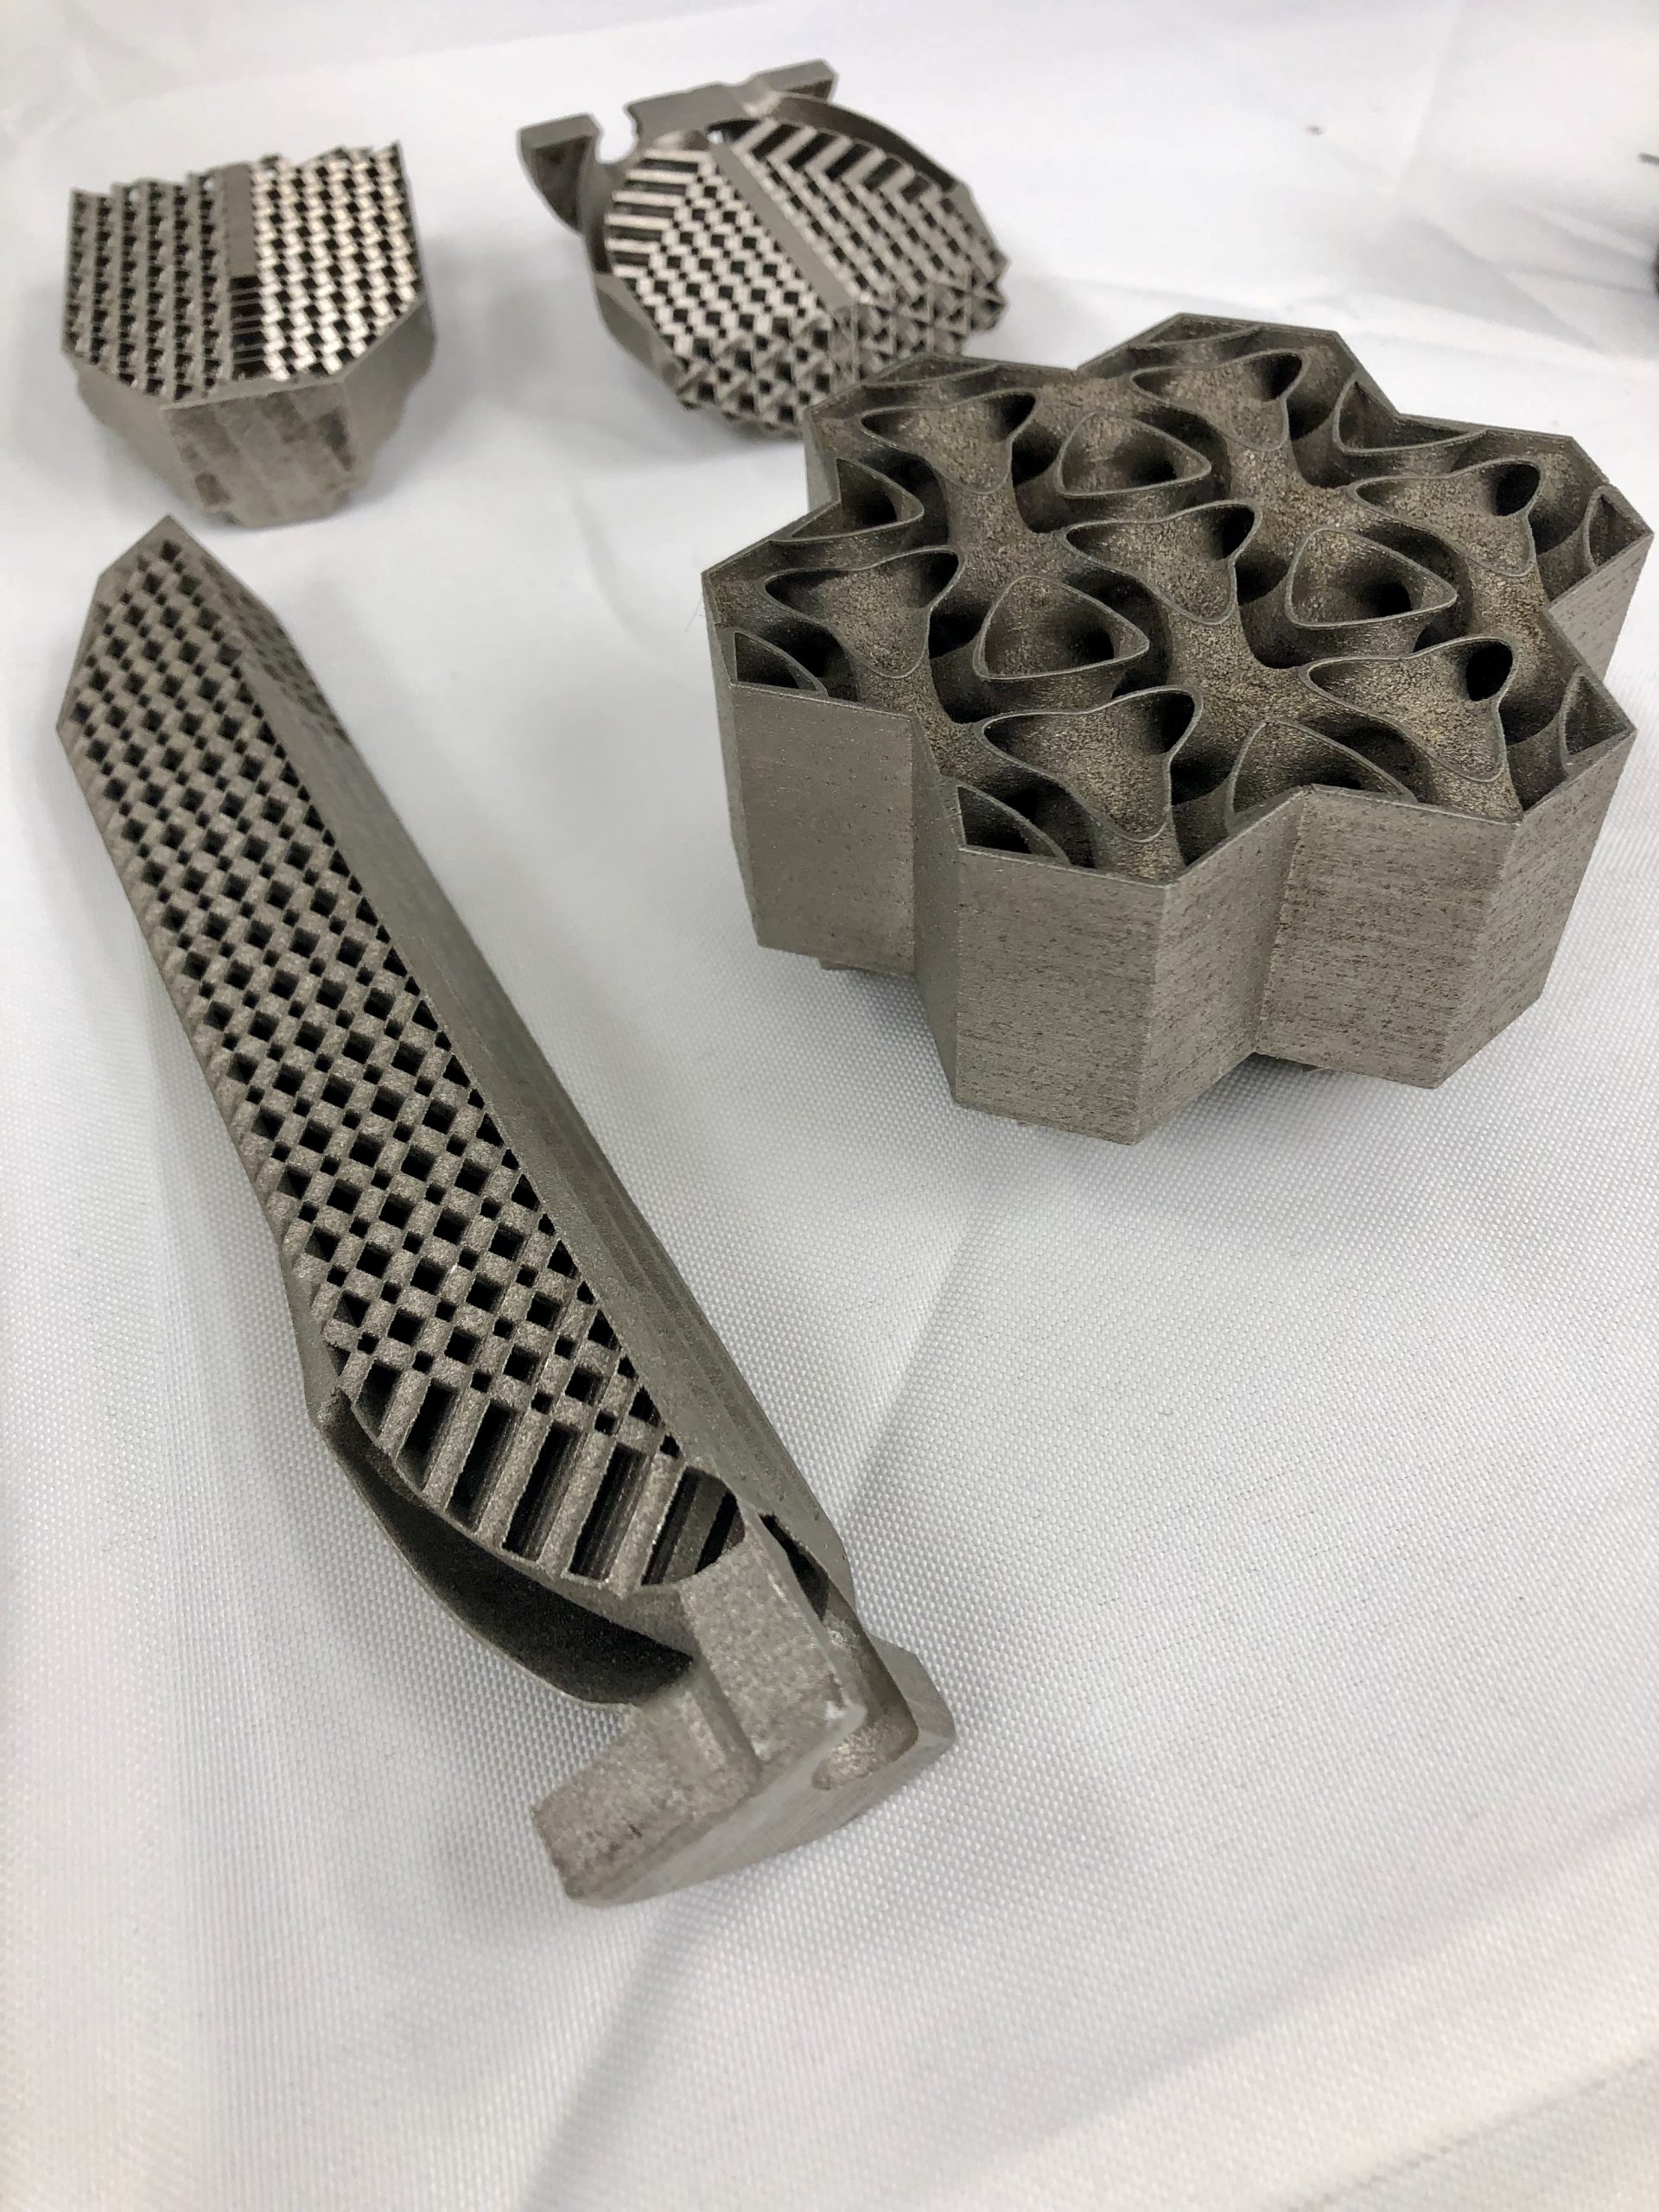 How 3D Printing is Helping GE Research Turn air into water Industrial Additive Manufacturing